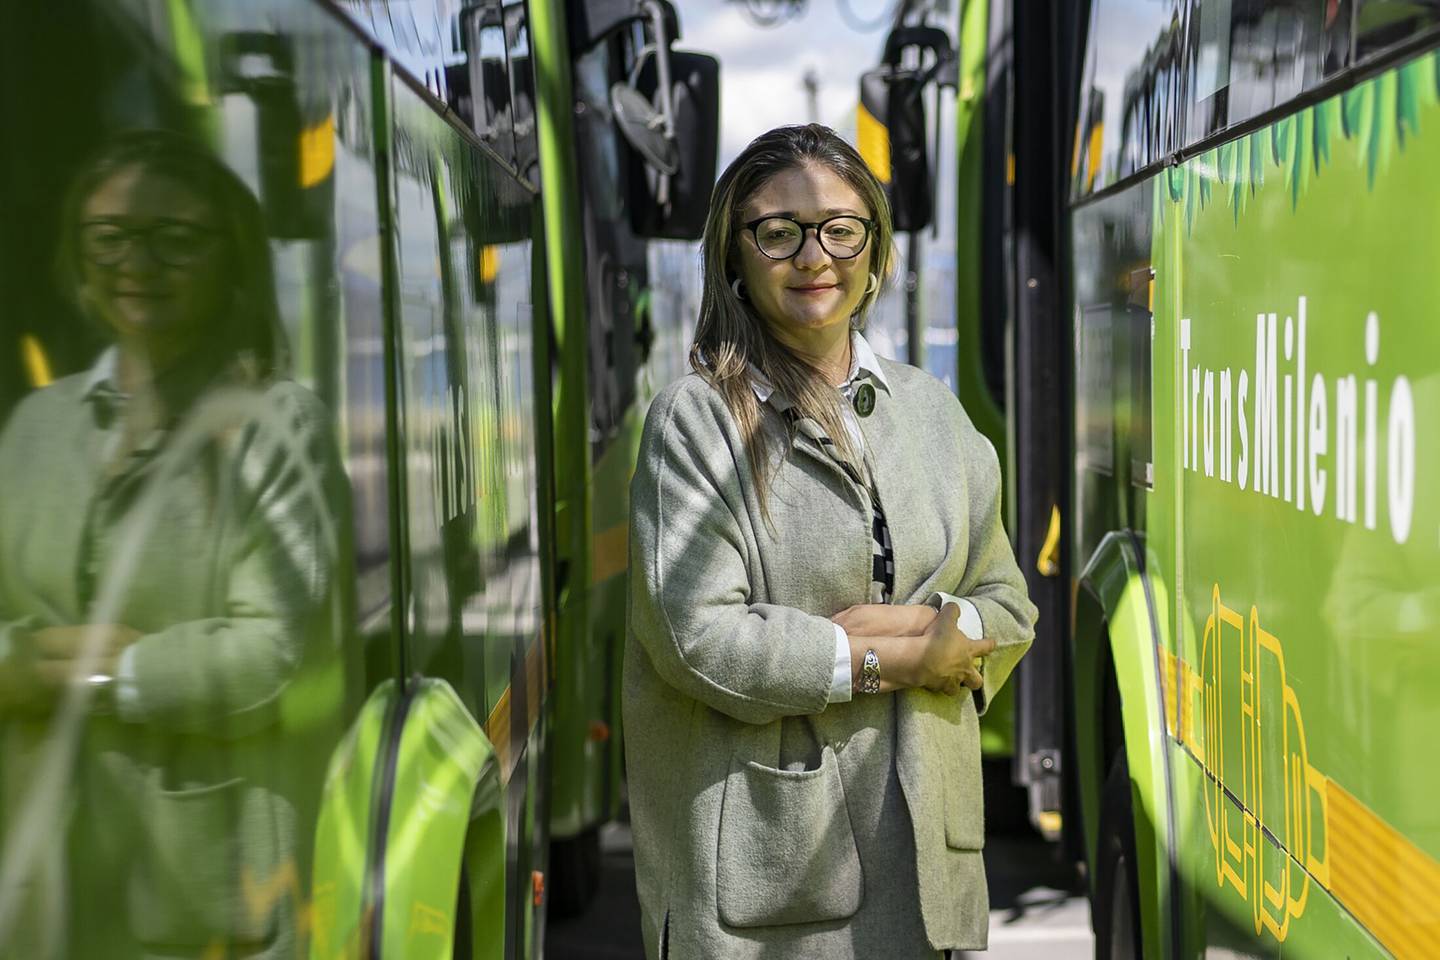 Carolina Martinez said the program is aiming for community outreach and quality of service to improve public transportation for riders.  Photographer: Nathalia Angarita/Bloombergdfd